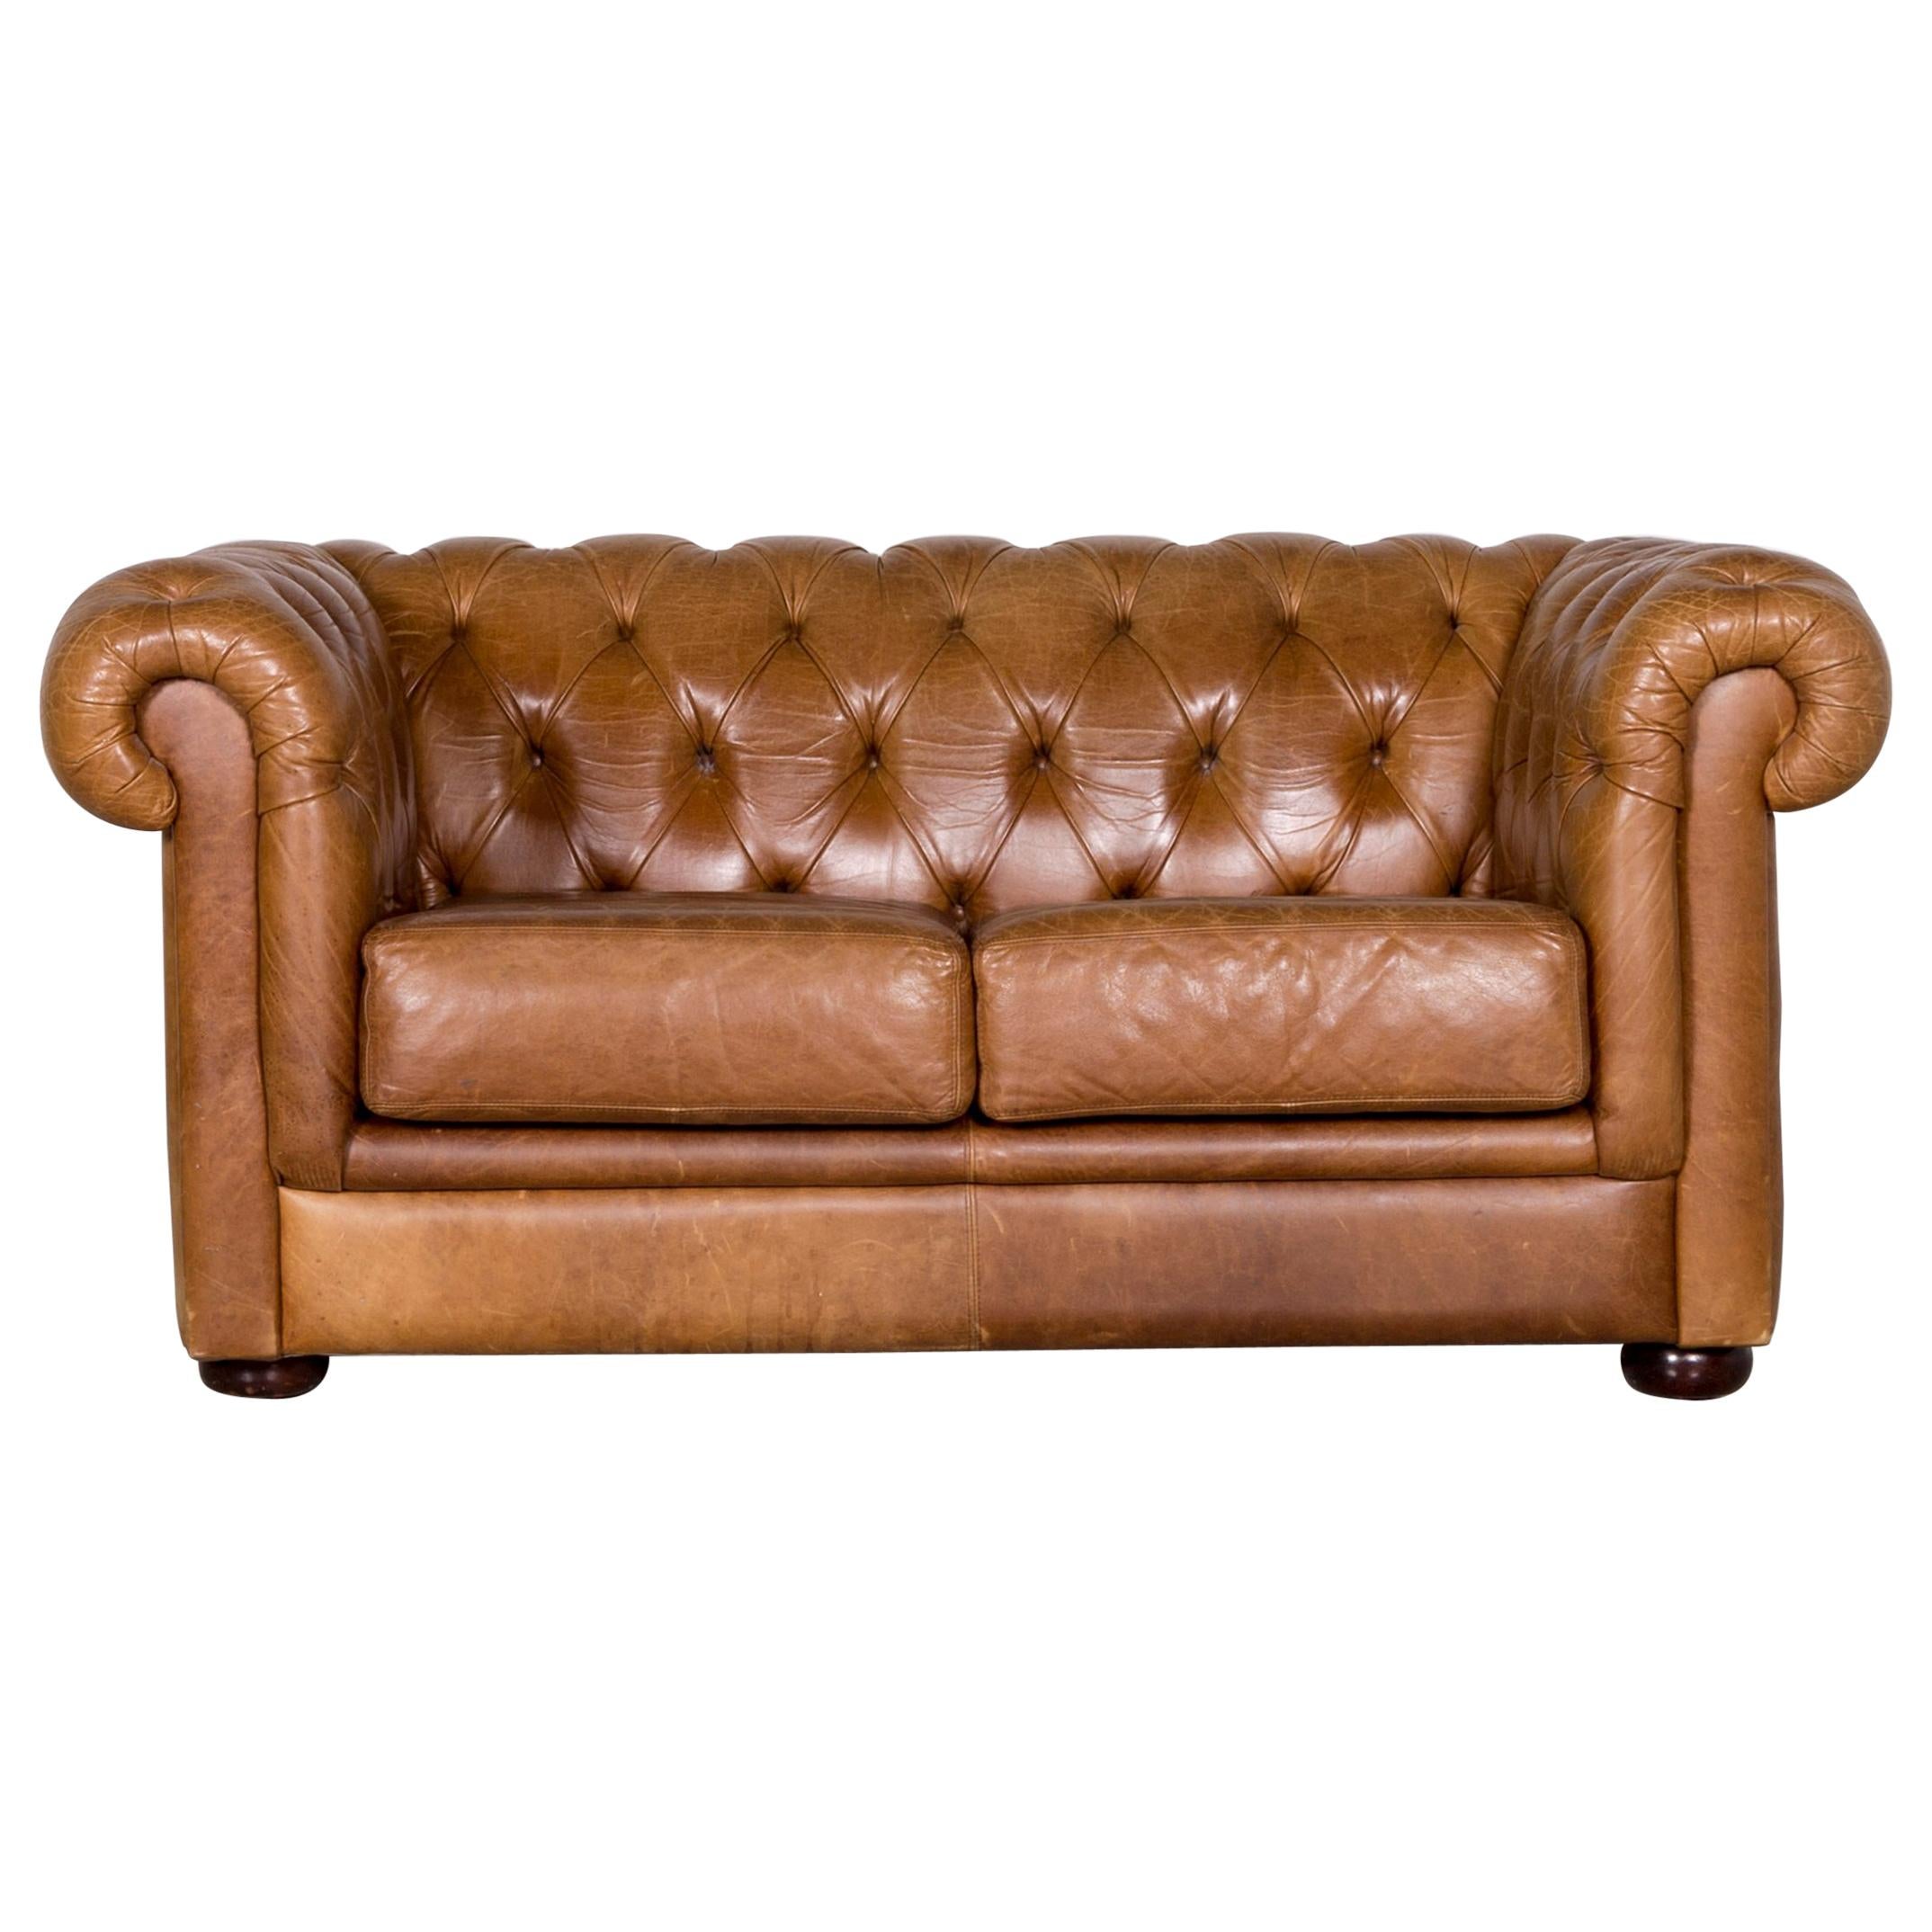 Chesterfield Leather Sofa Brown Vintage Two-Seat Couch For Sale